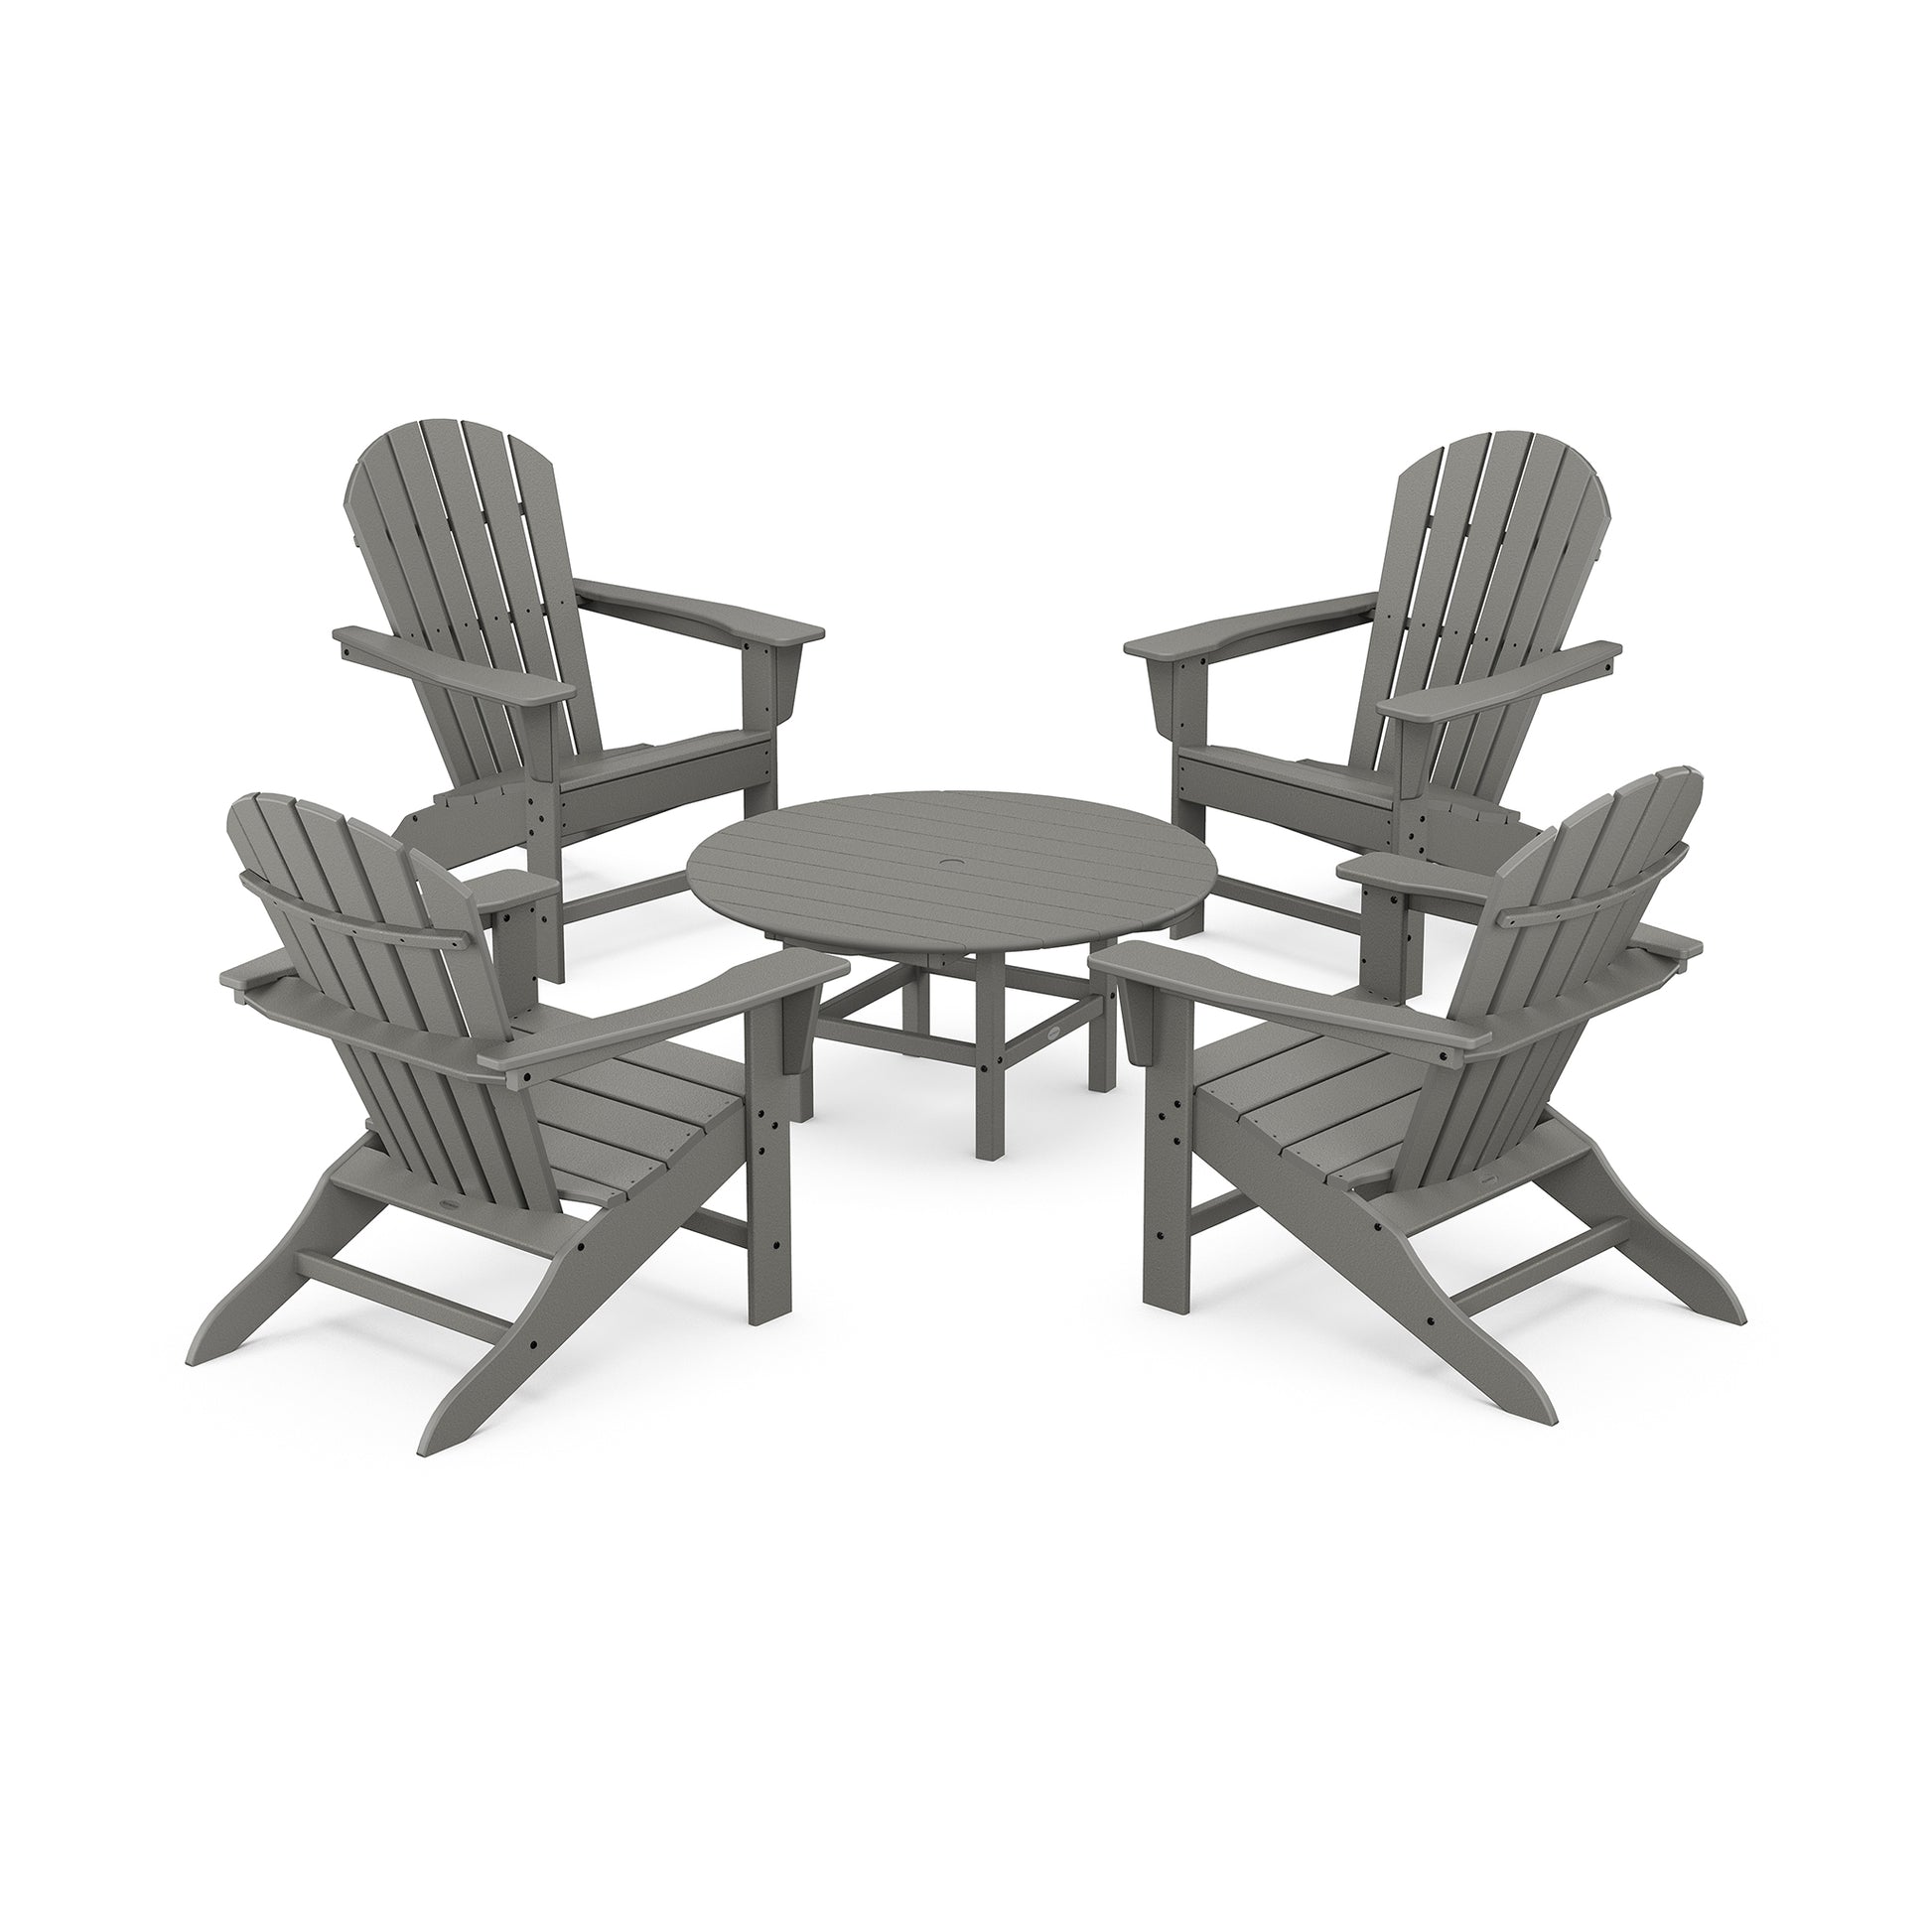 Four gray POLYWOOD South Beach Adirondack-style chairs arranged around a matching small round table, set on a plain white background.